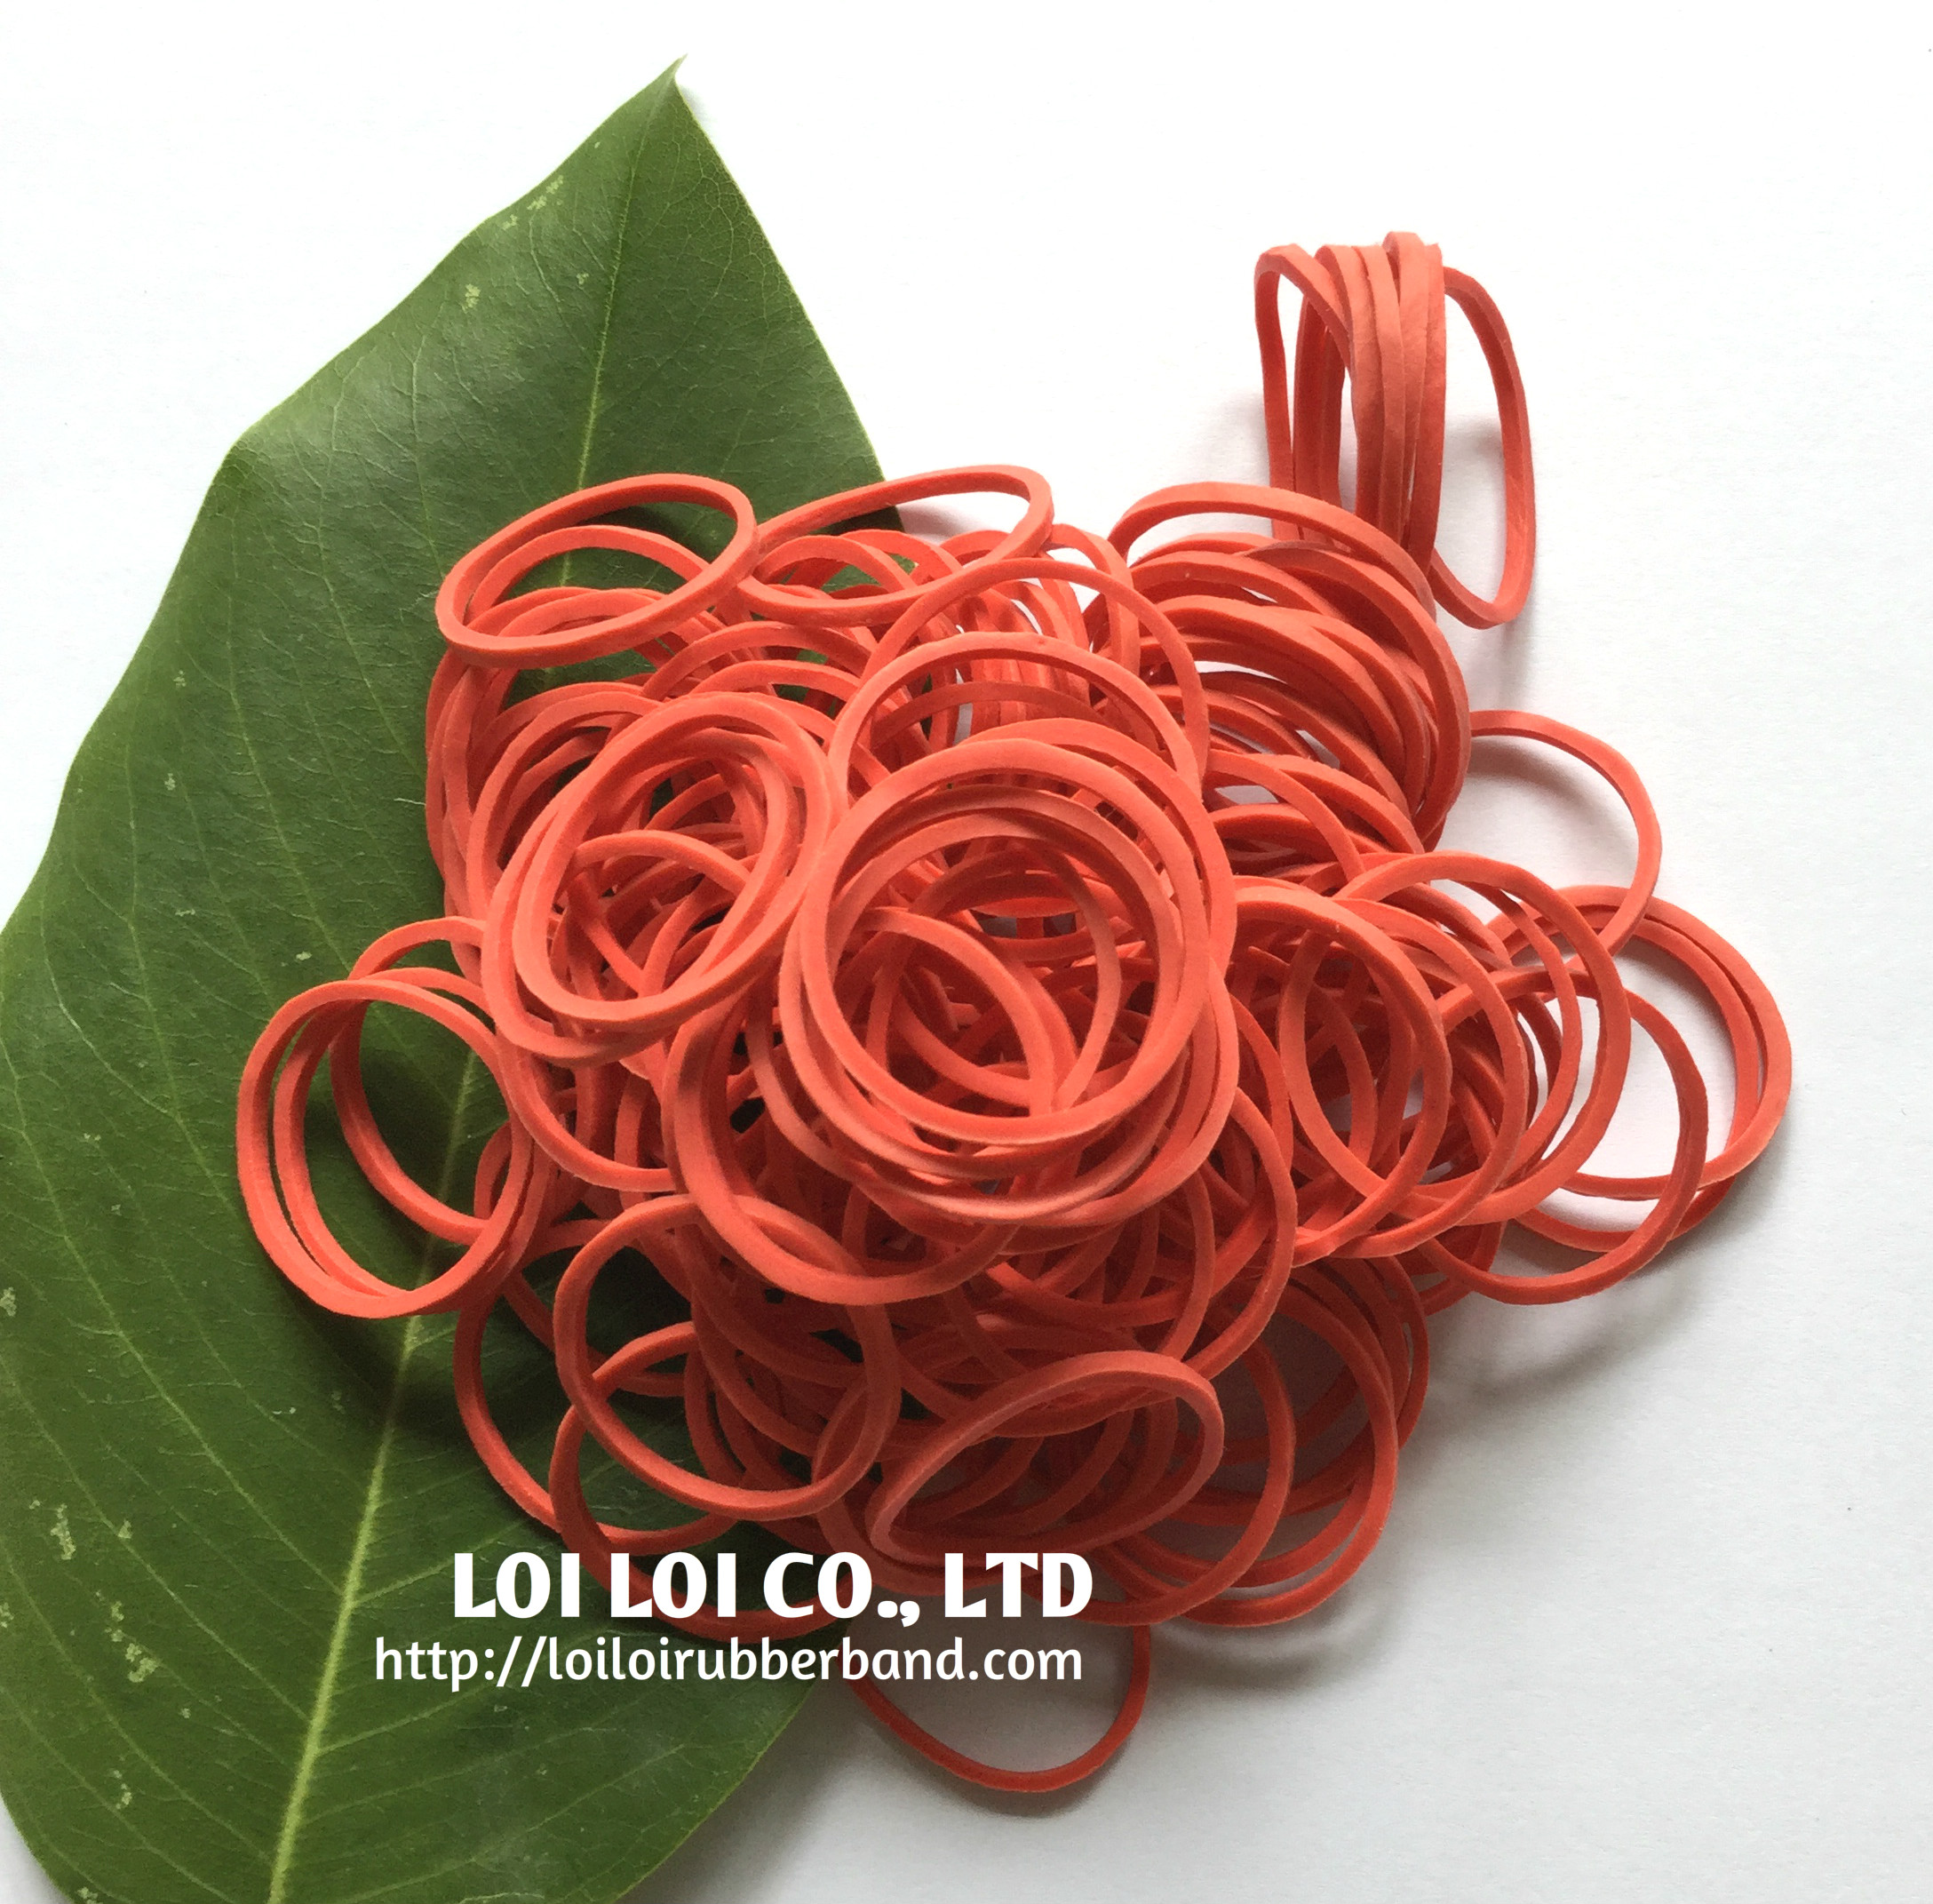 Factory price Selling Pink colour elastic rubber bands / Bright red tone natural cheap rubber band custom rubber wrist band